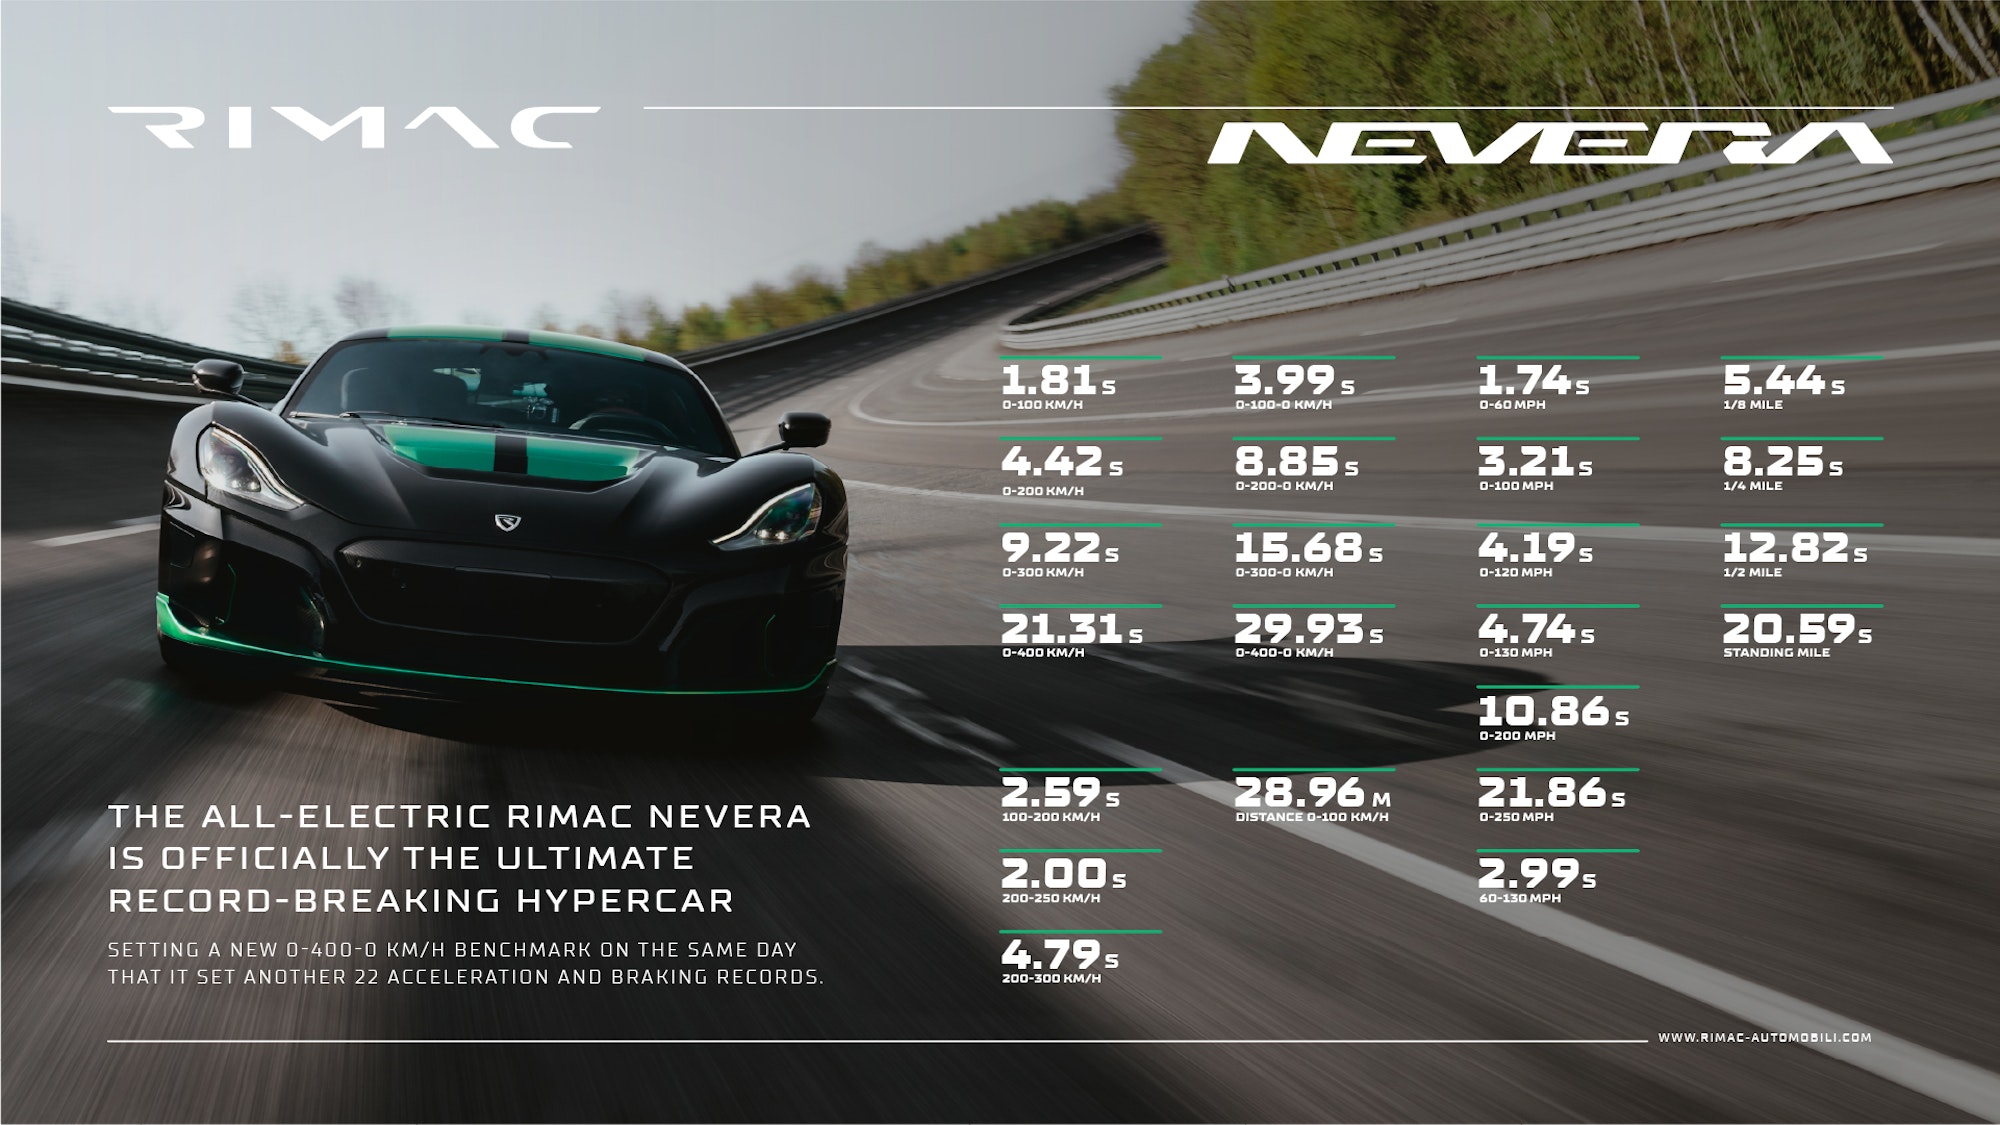 Rimac Nevera sets 23 performance records in a single day